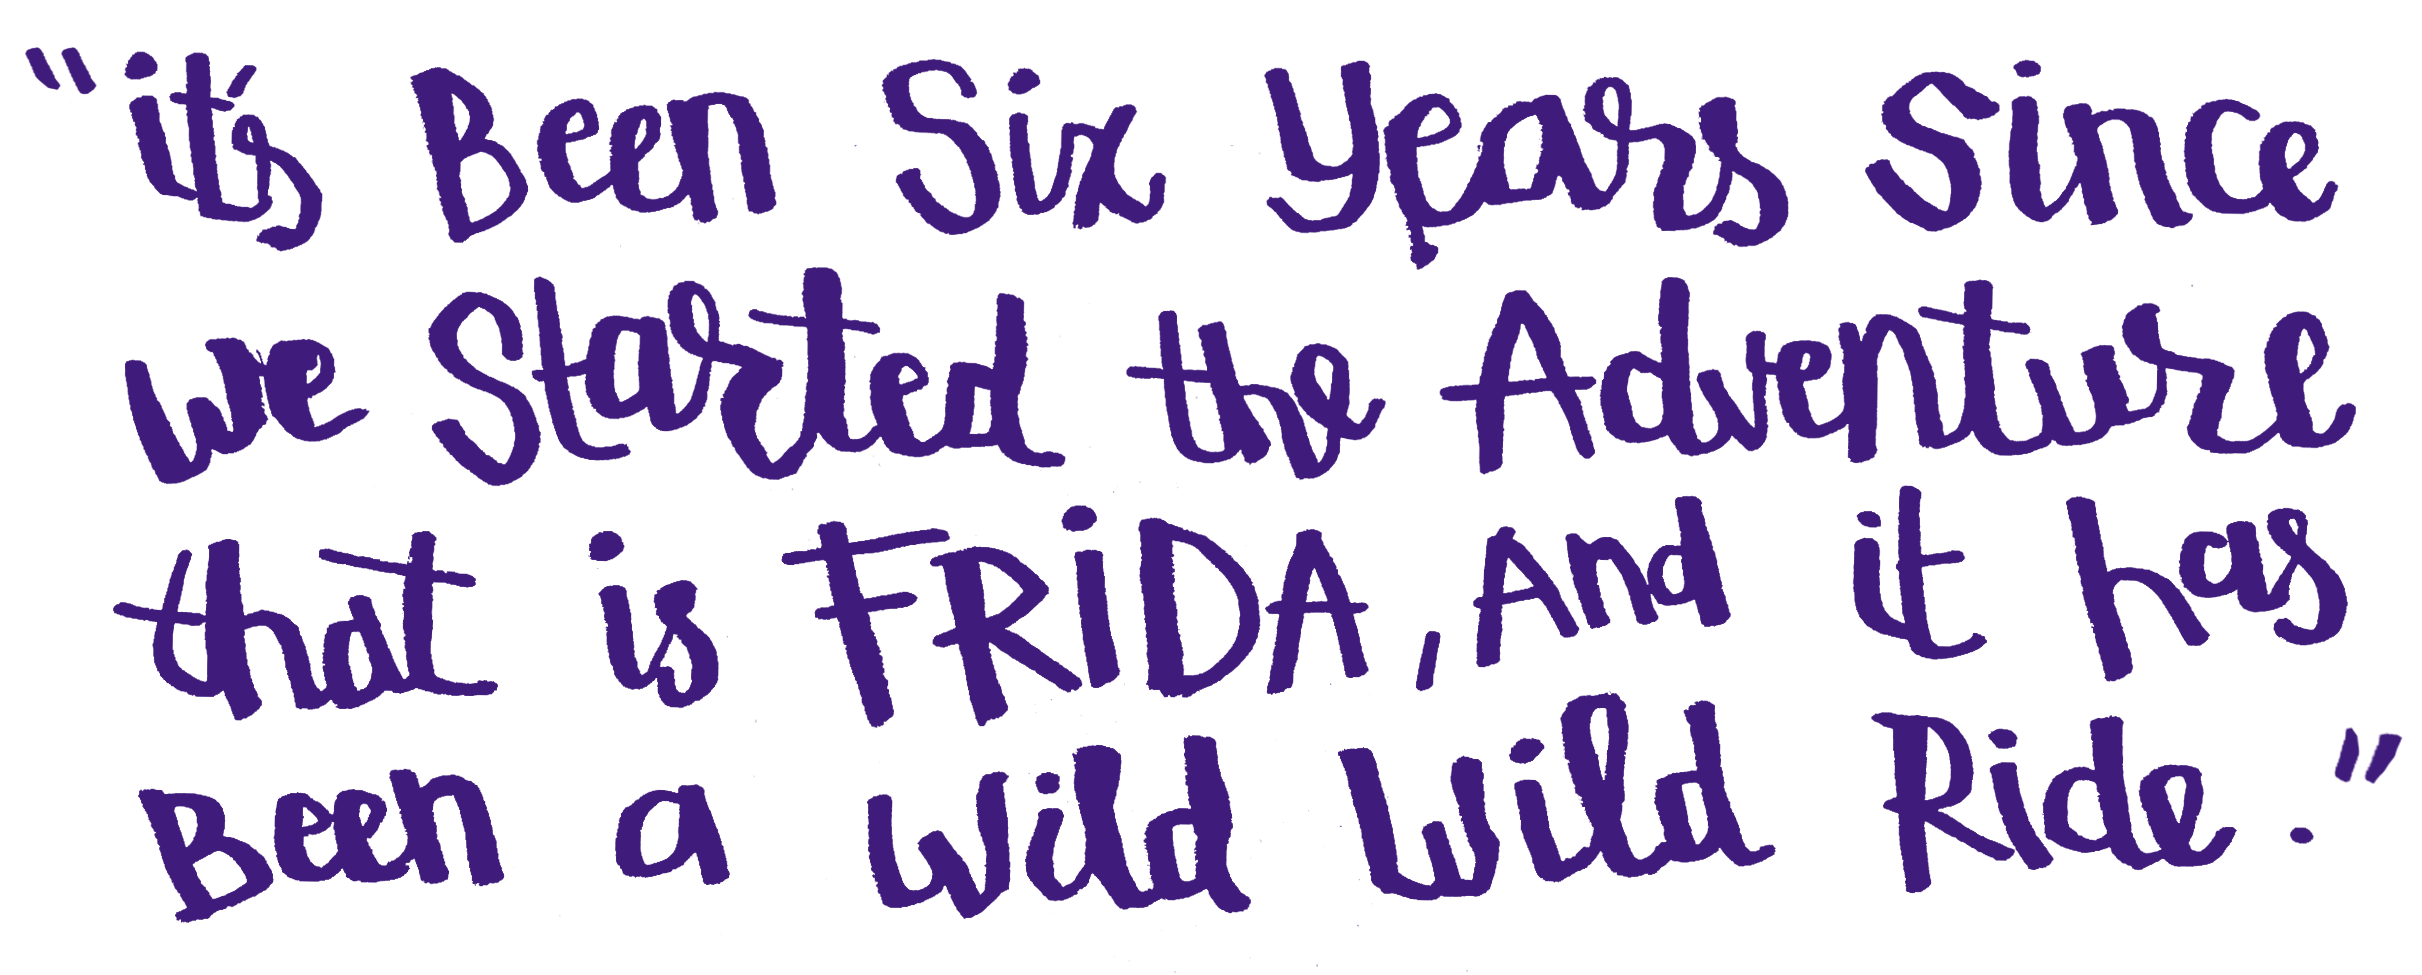 It's been 6 years since we started the Adventure that is Frida, and it has been a wild wild ride